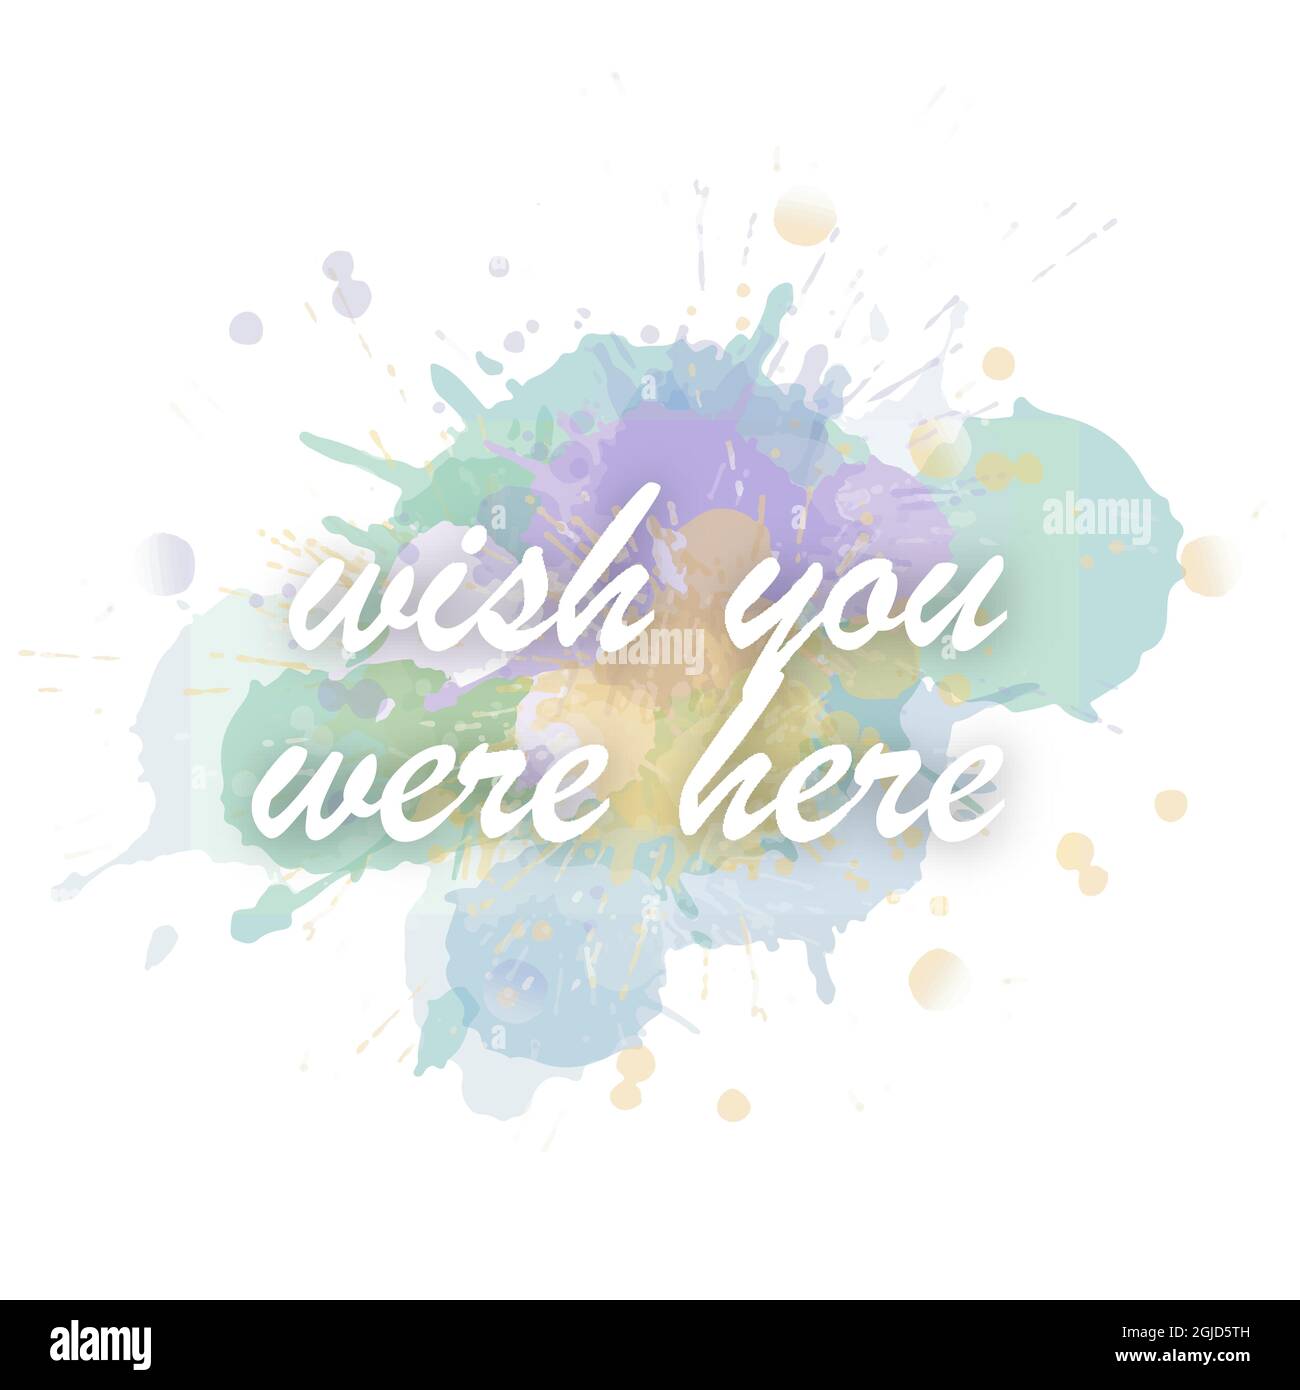 Watercolor motivational short quotes hand painted grunge illustration- wish you were here Stock Vector